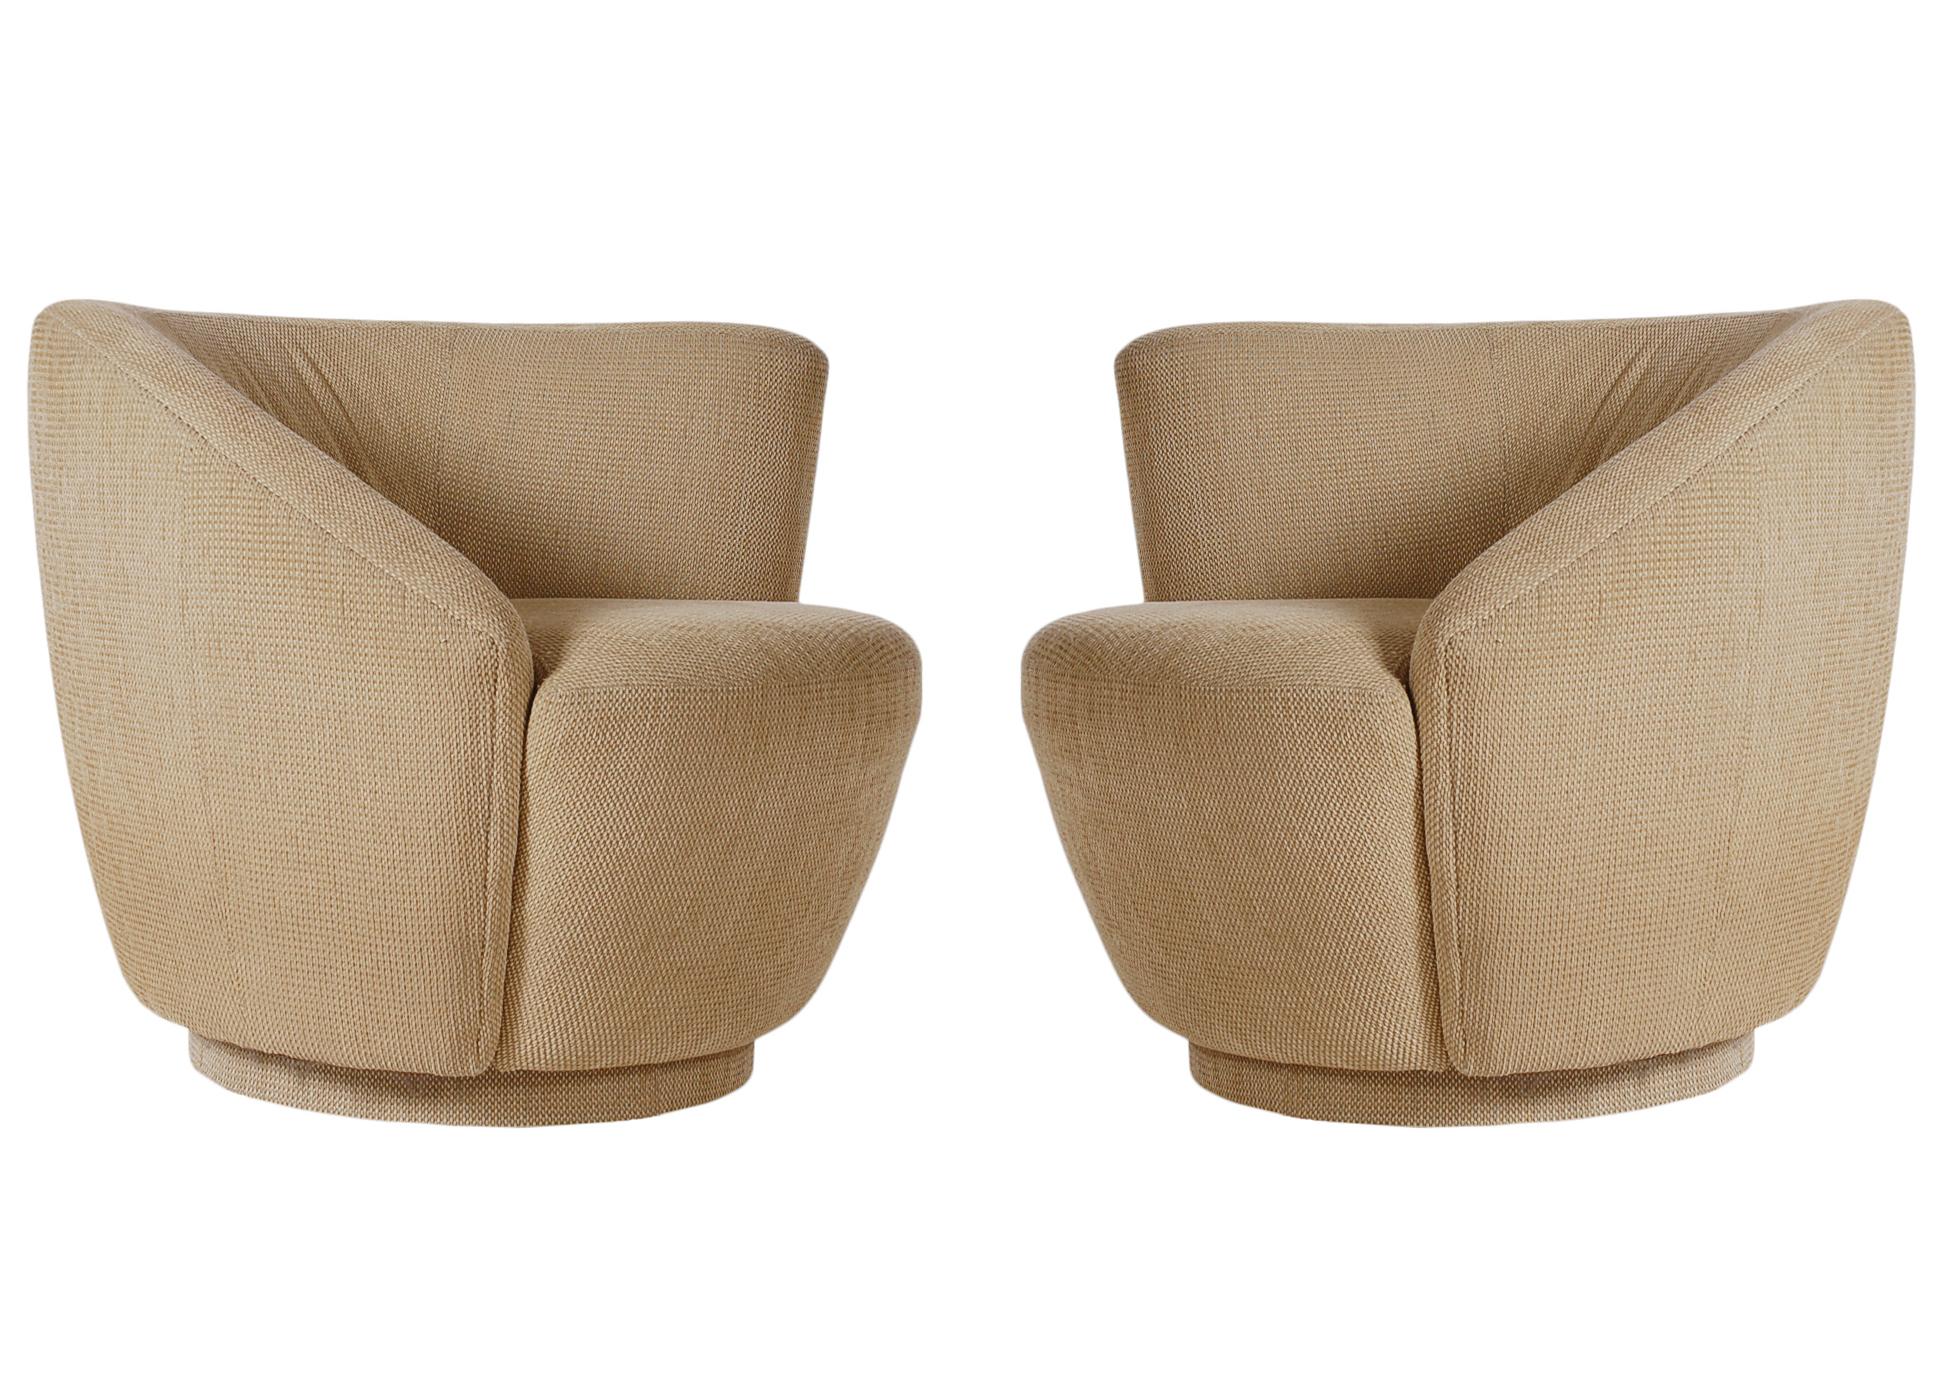 Late 20th Century Matching Pair of Nautilus Swivel Lounge Chairs by Vladimir Kagan for Preview